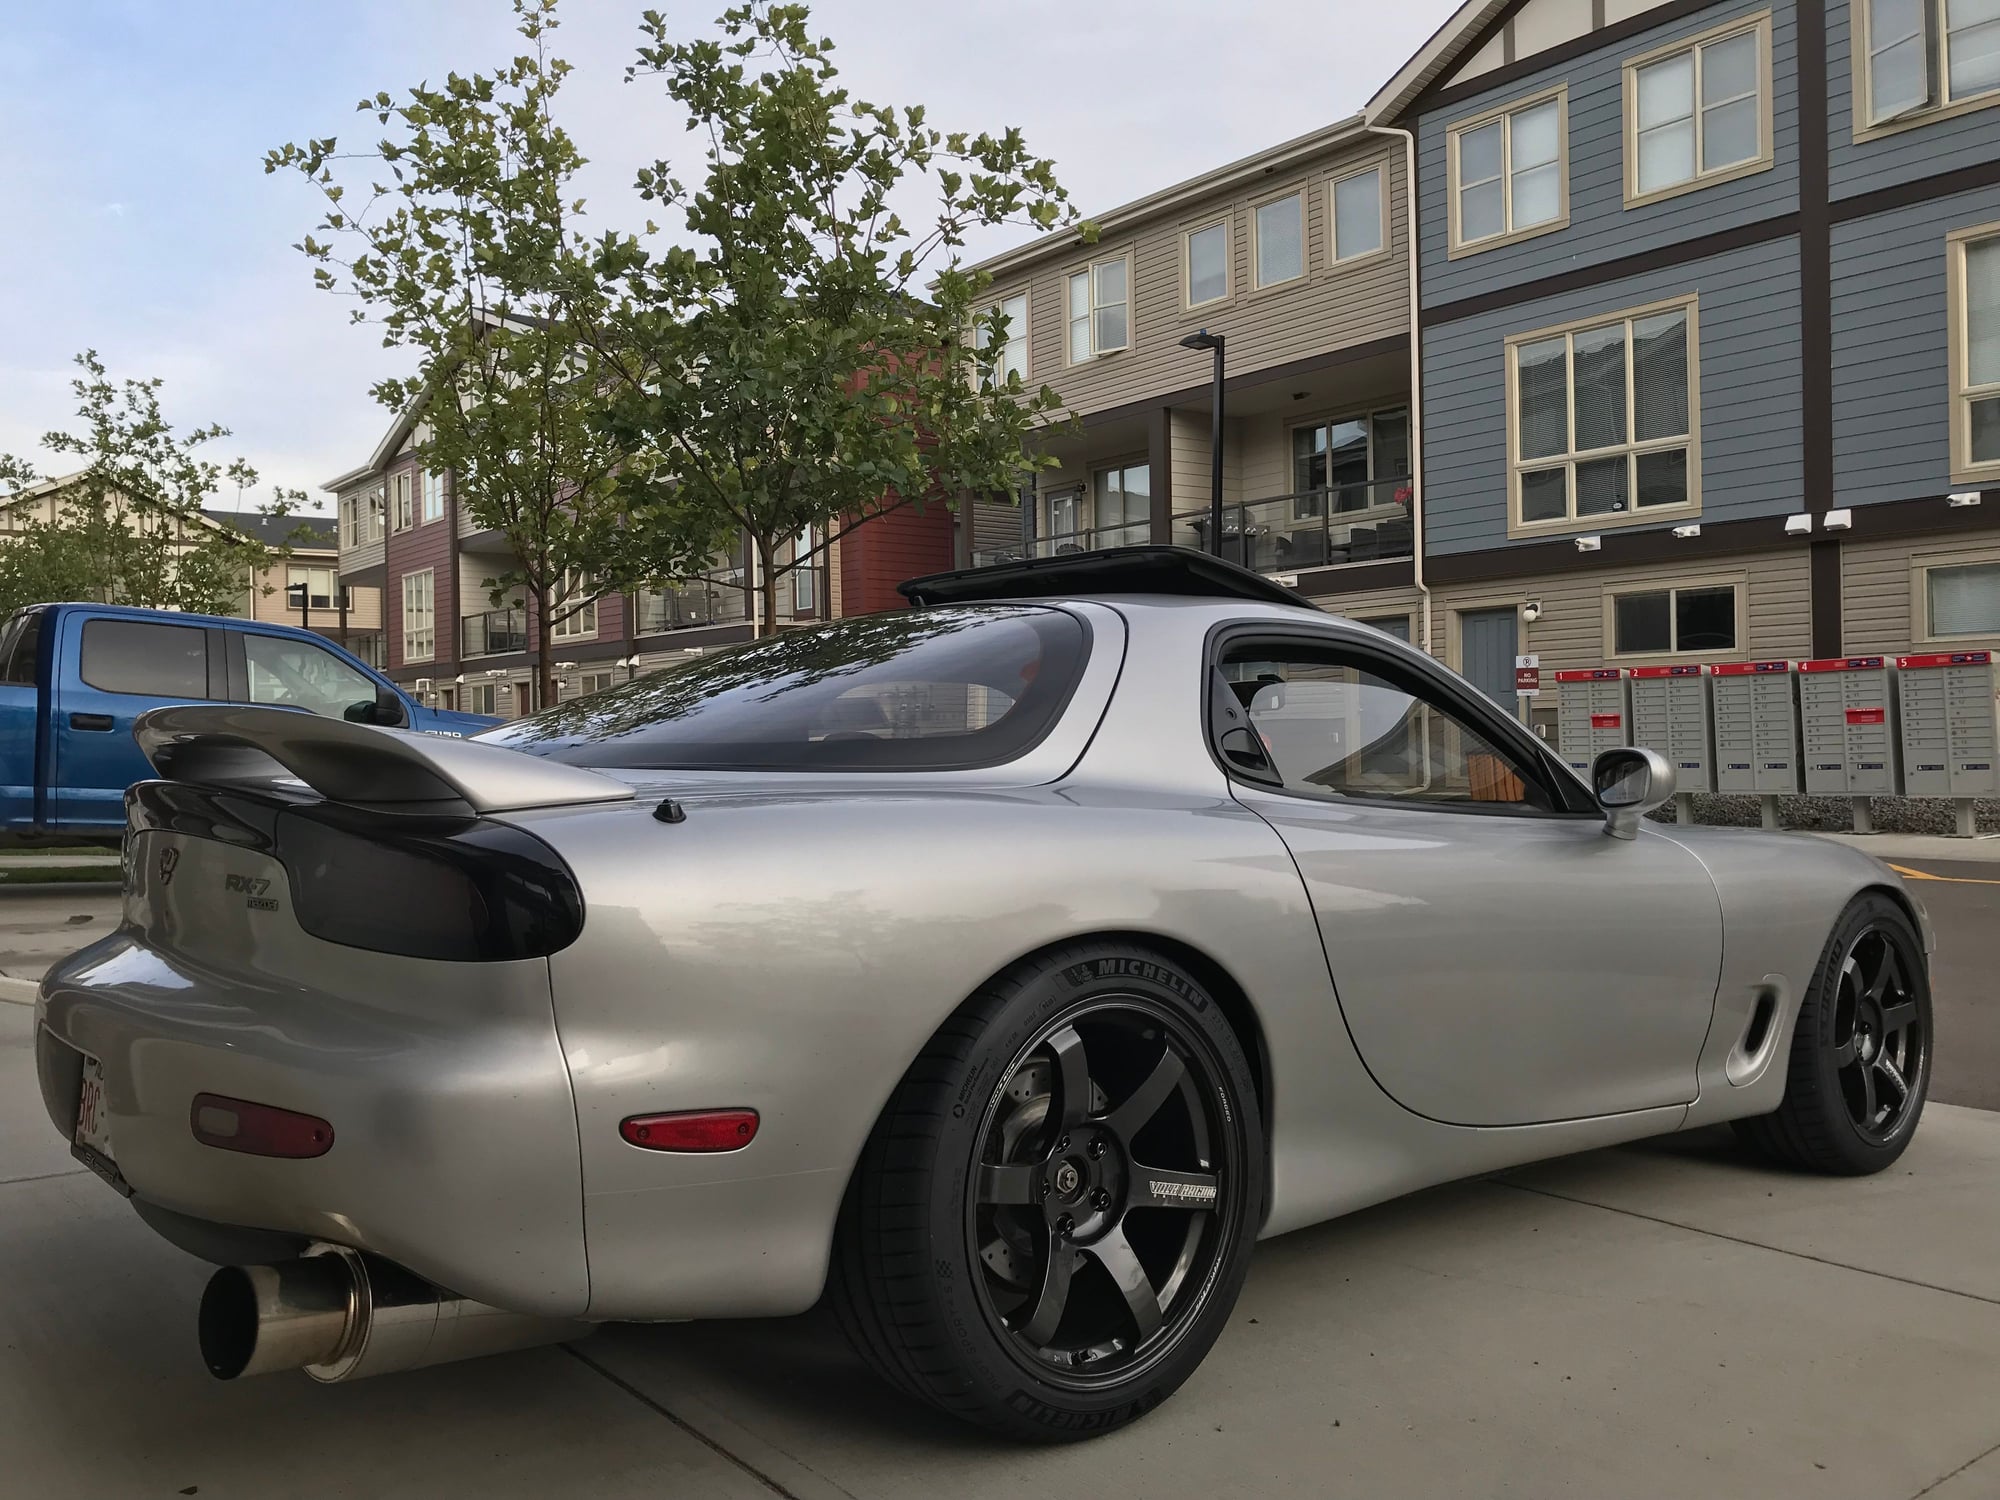 1993 Mazda RX-7 - FS: Canadian - 1993 RX7 Touring - Used - VIN JM1FD3326P0210626 - 61,500 Miles - Other - 2WD - Manual - Hatchback - Silver - Calgary, AB T0M0N0, Canada